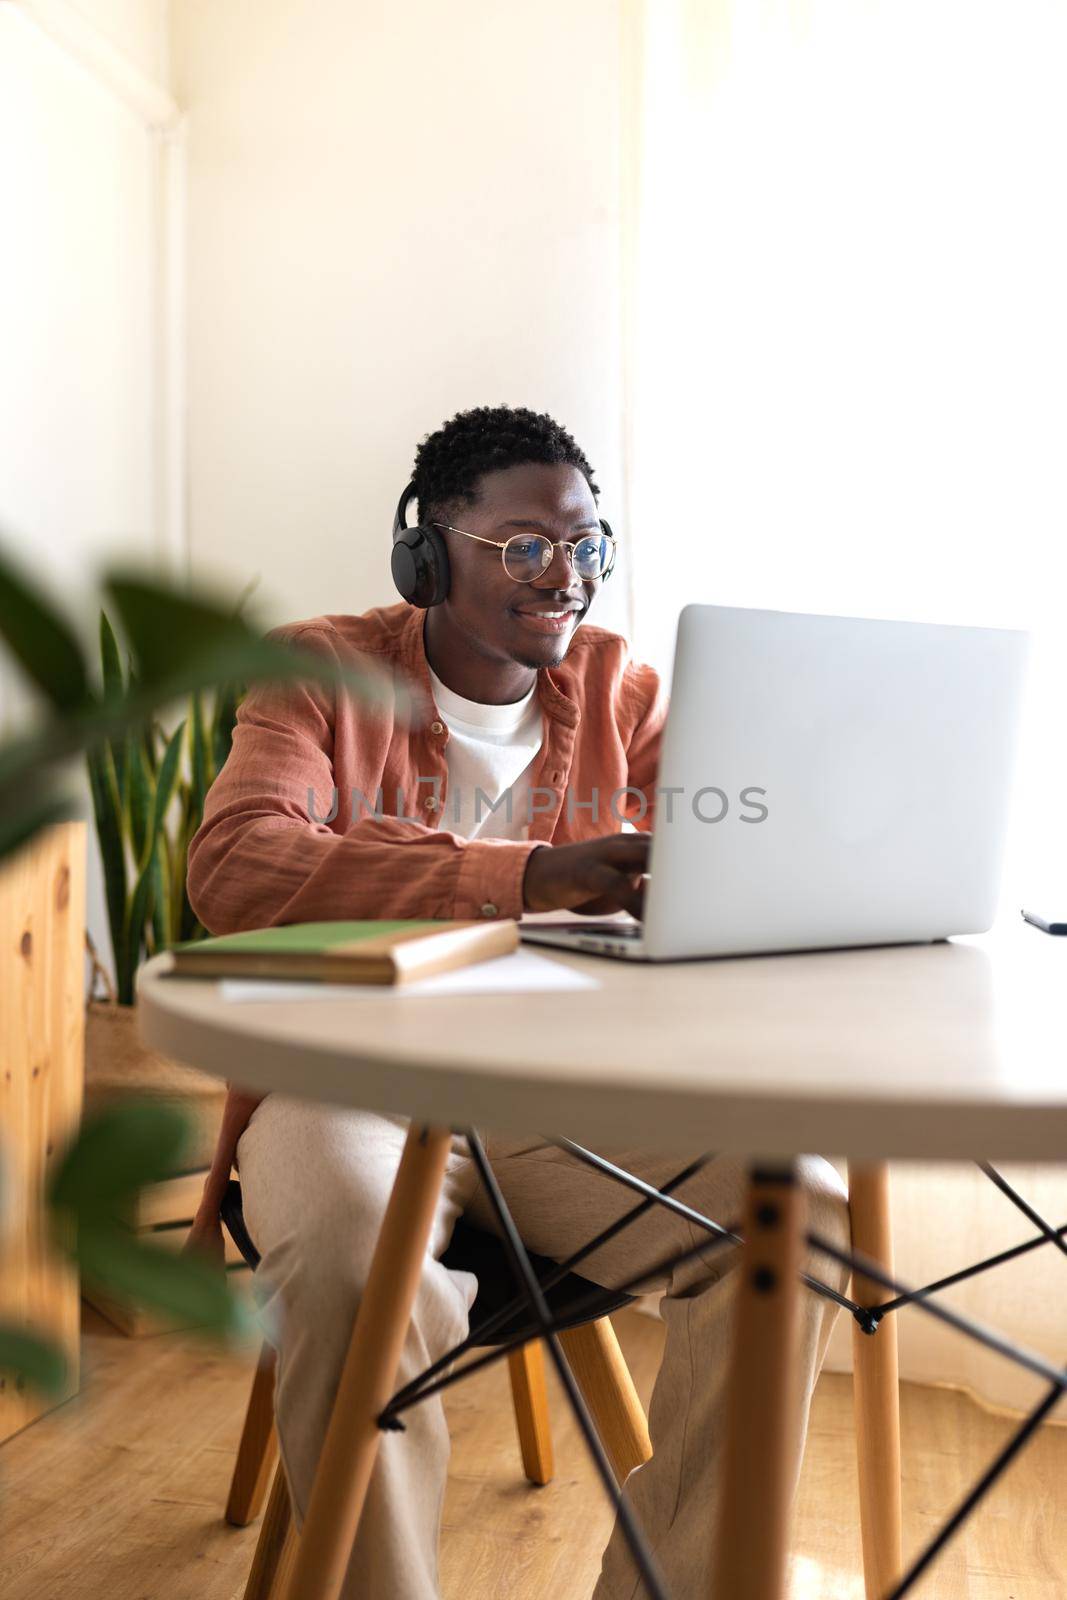 Vertical portrait of young African American man wearing headphones working, studying at home using laptop. Copy space. by Hoverstock